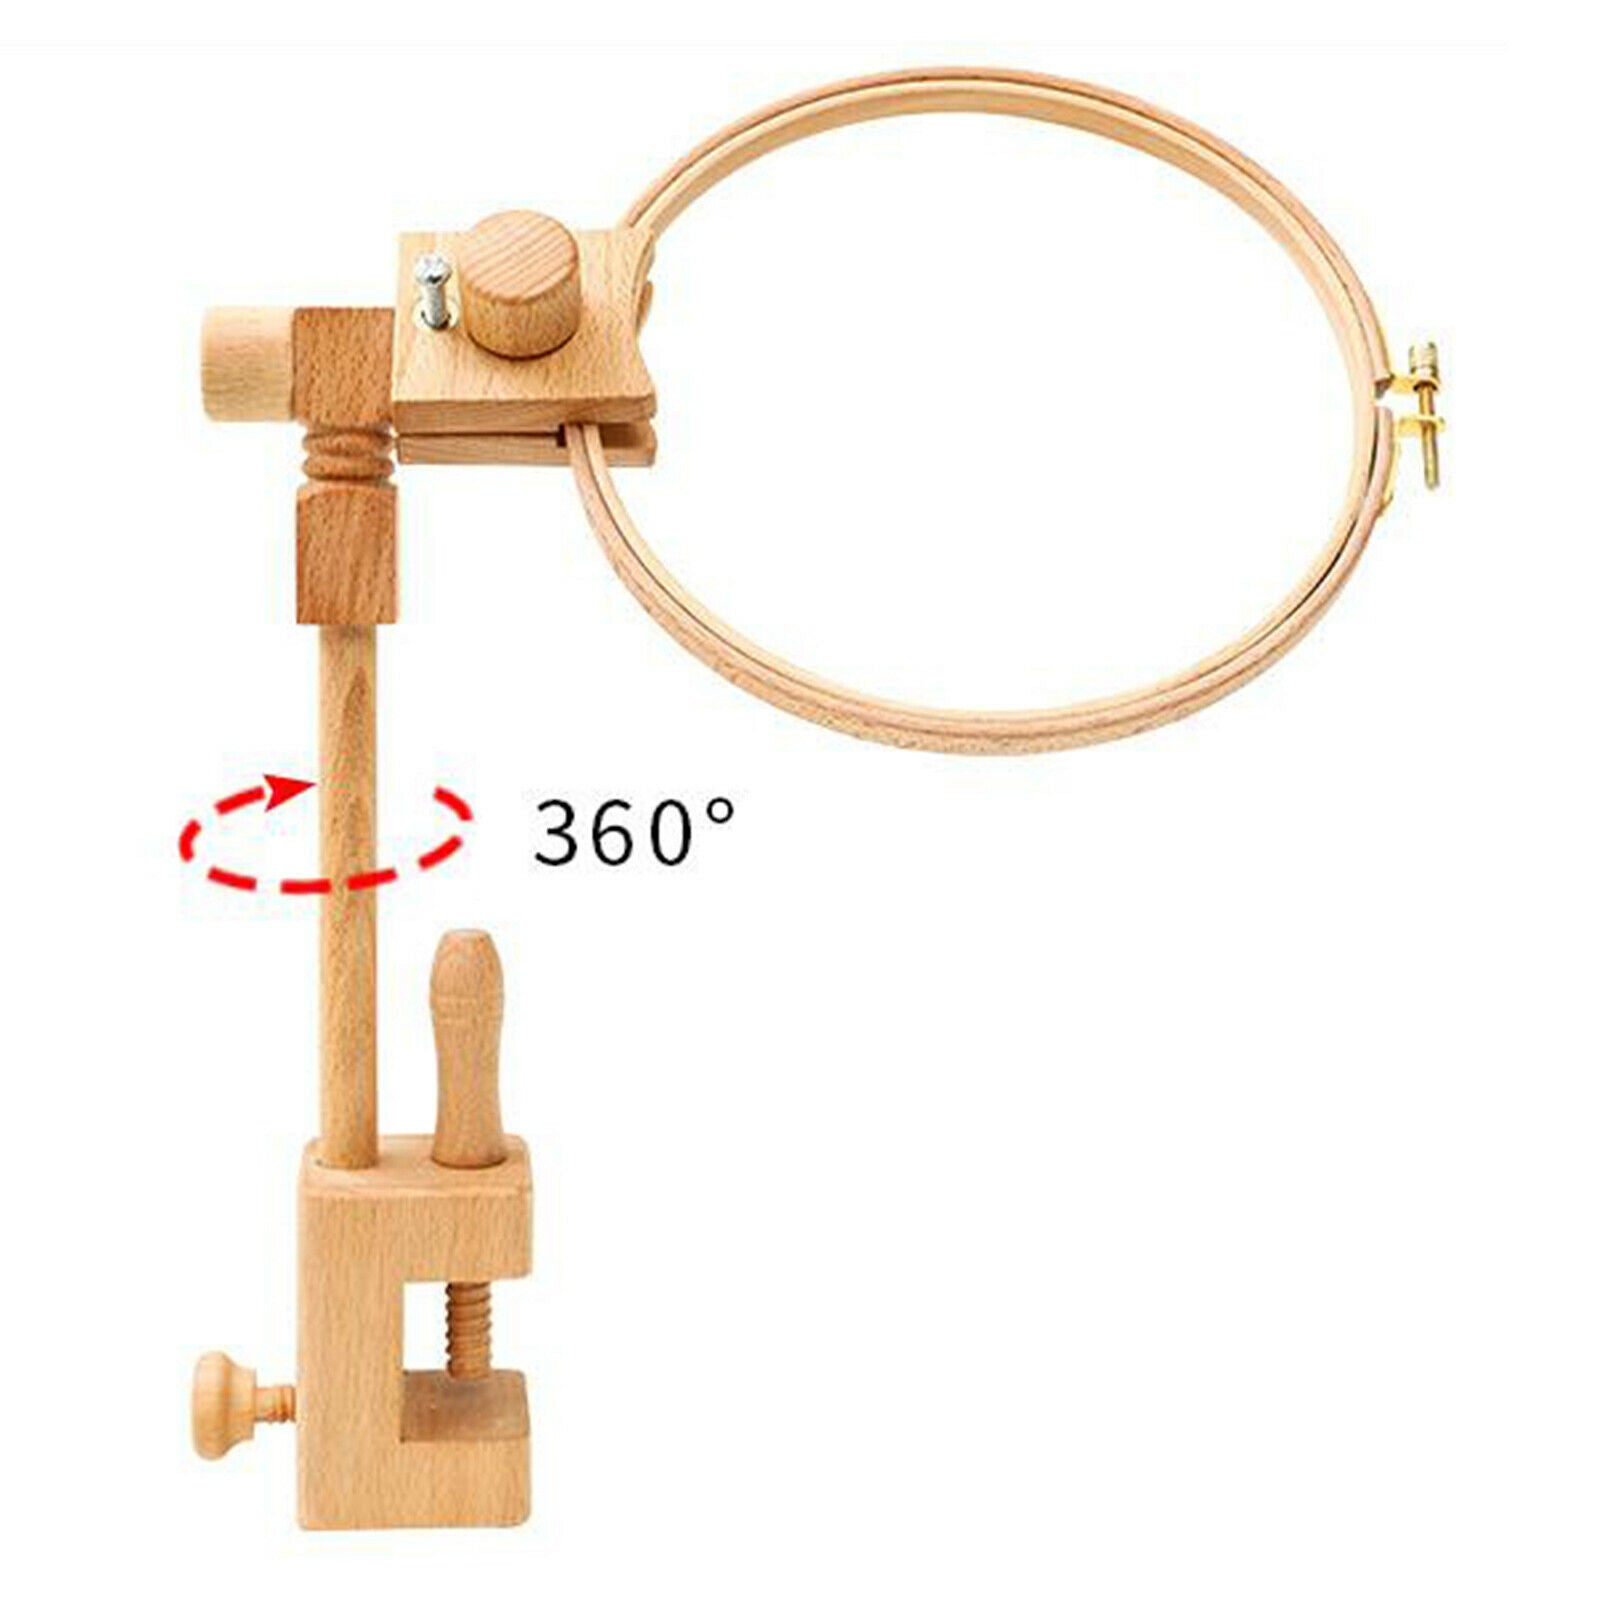 Natural Wooden Embroidery Hoop Stand Desktop Cross Stitch Frame Sewing Tools